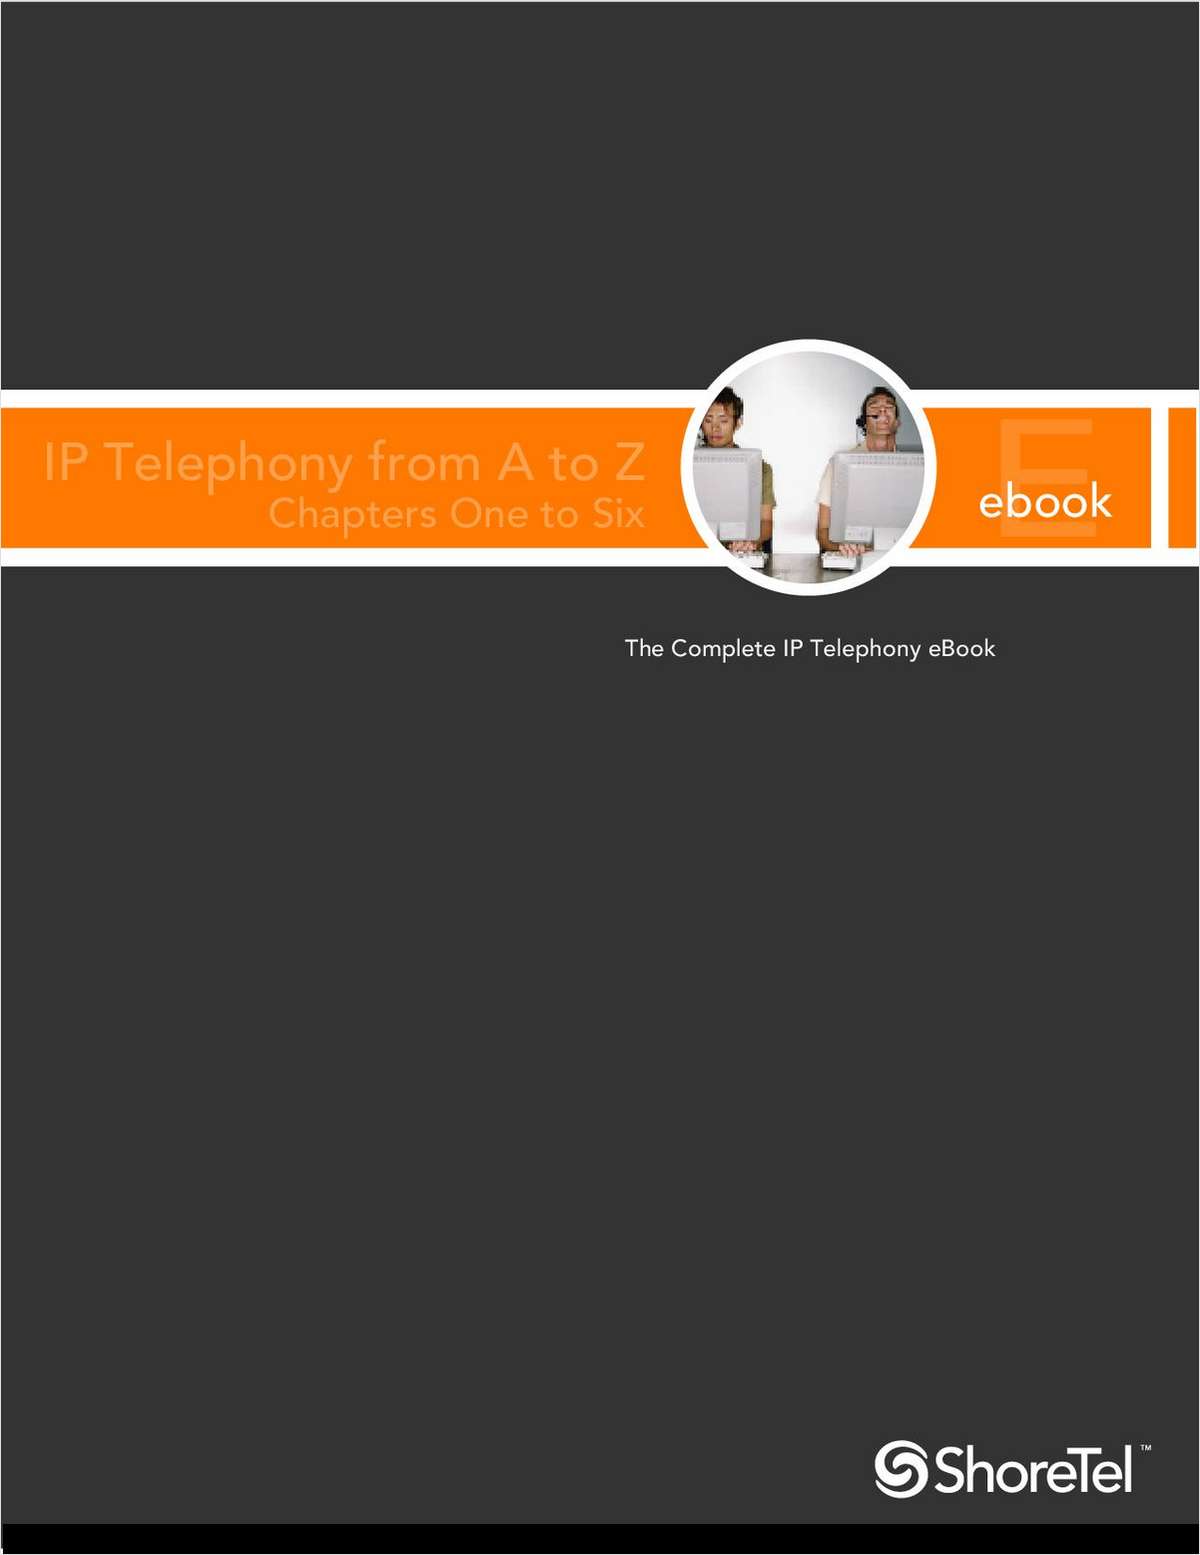 IP Telephony from A to Z eBook